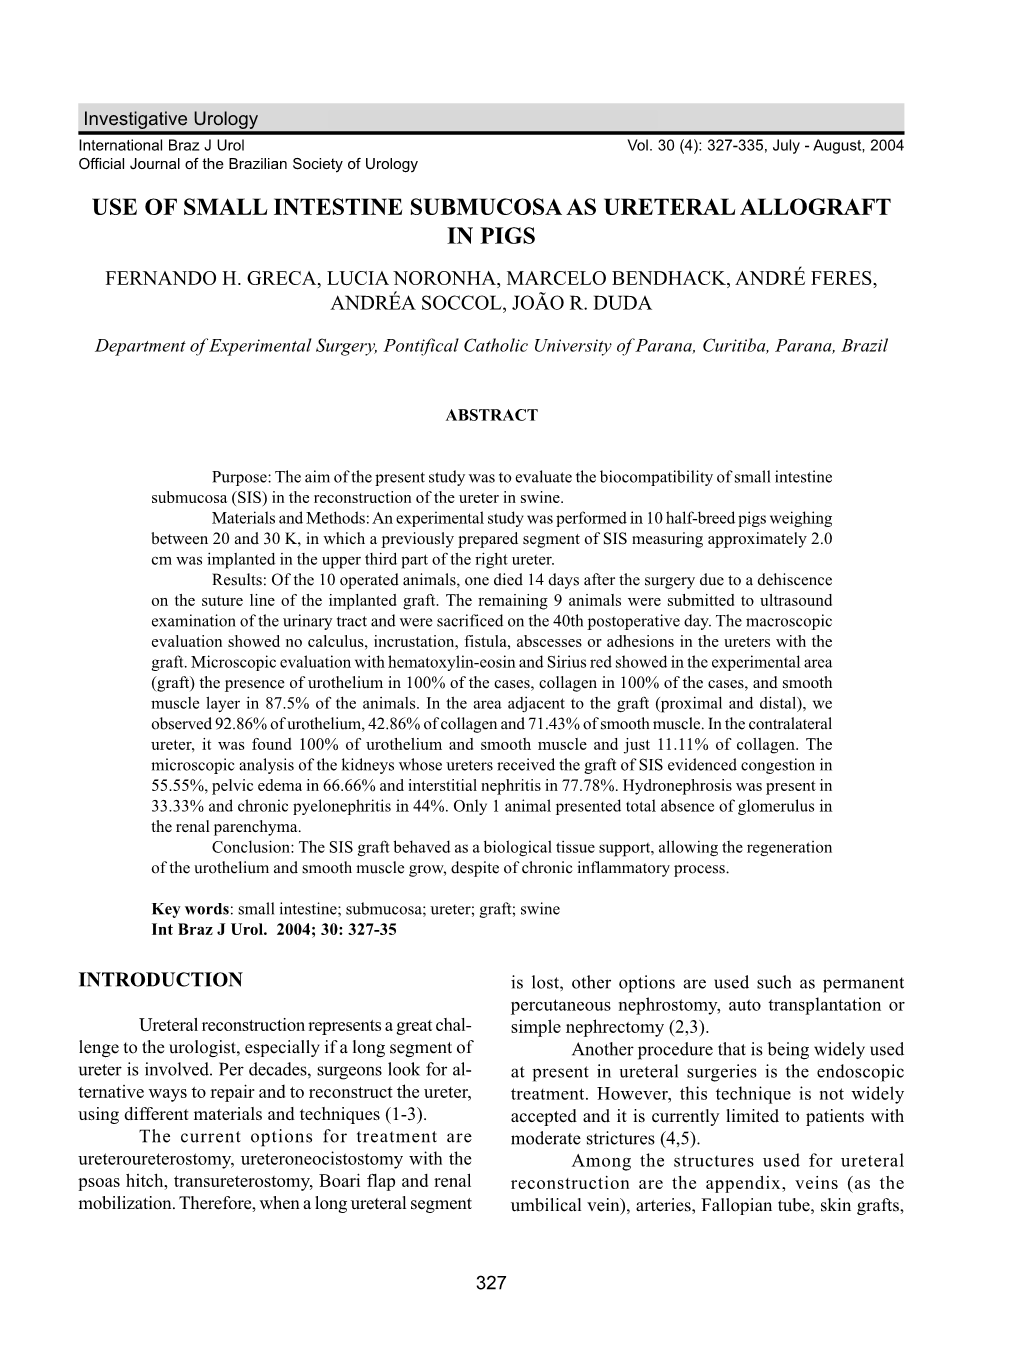 Use of Small Intestine Submucosa As Ureteral Allograft in Pigs Fernando H